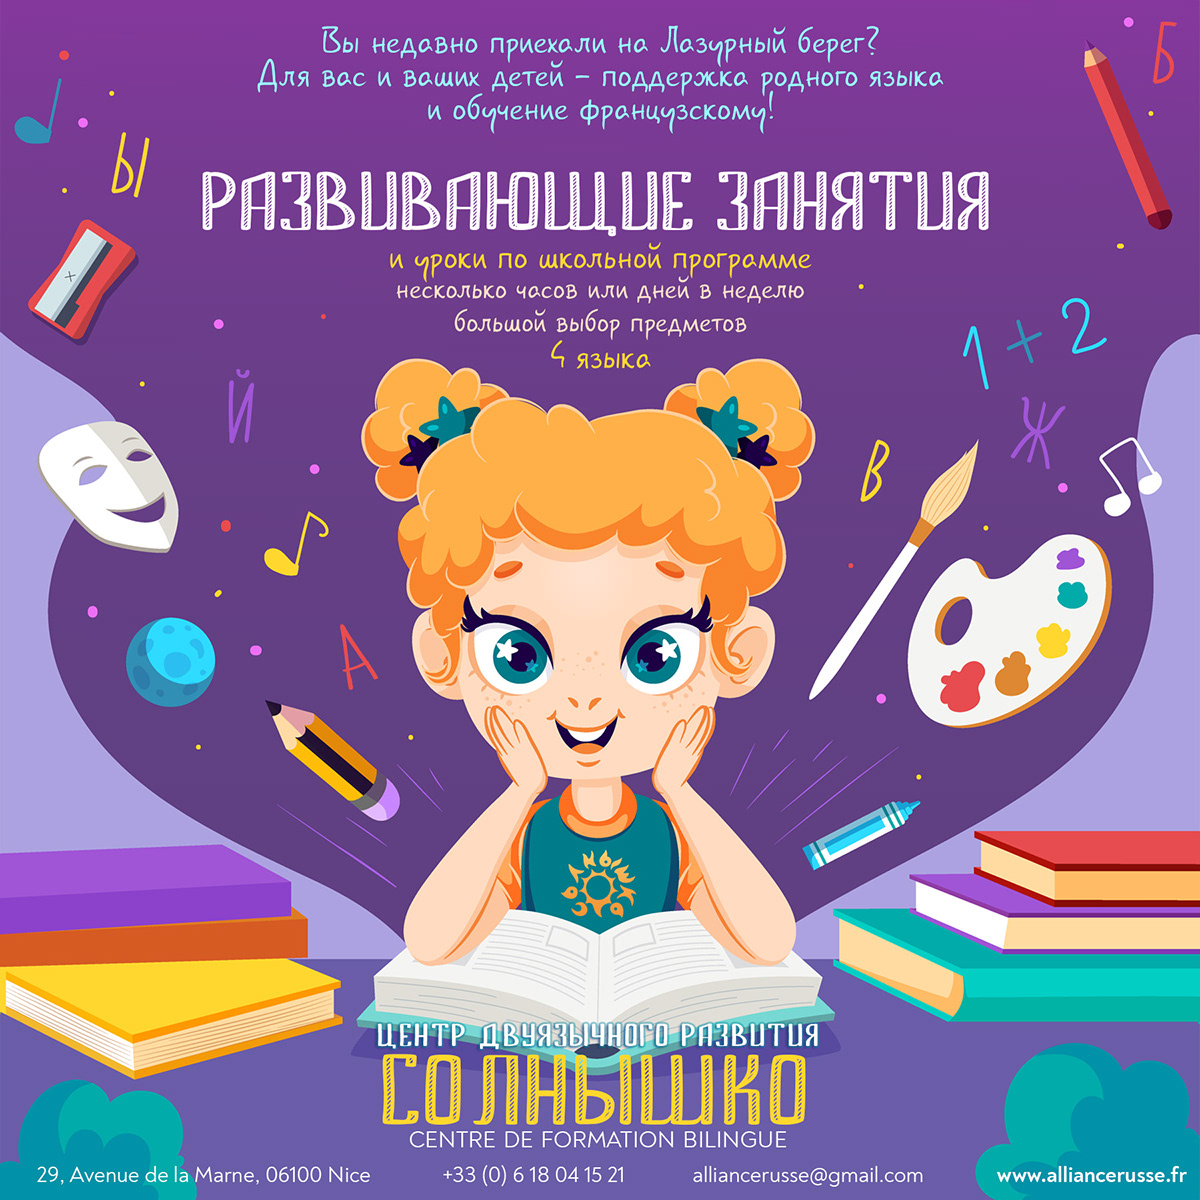 Promotional poster design for a Russian private school in Nice, France - ver. for web